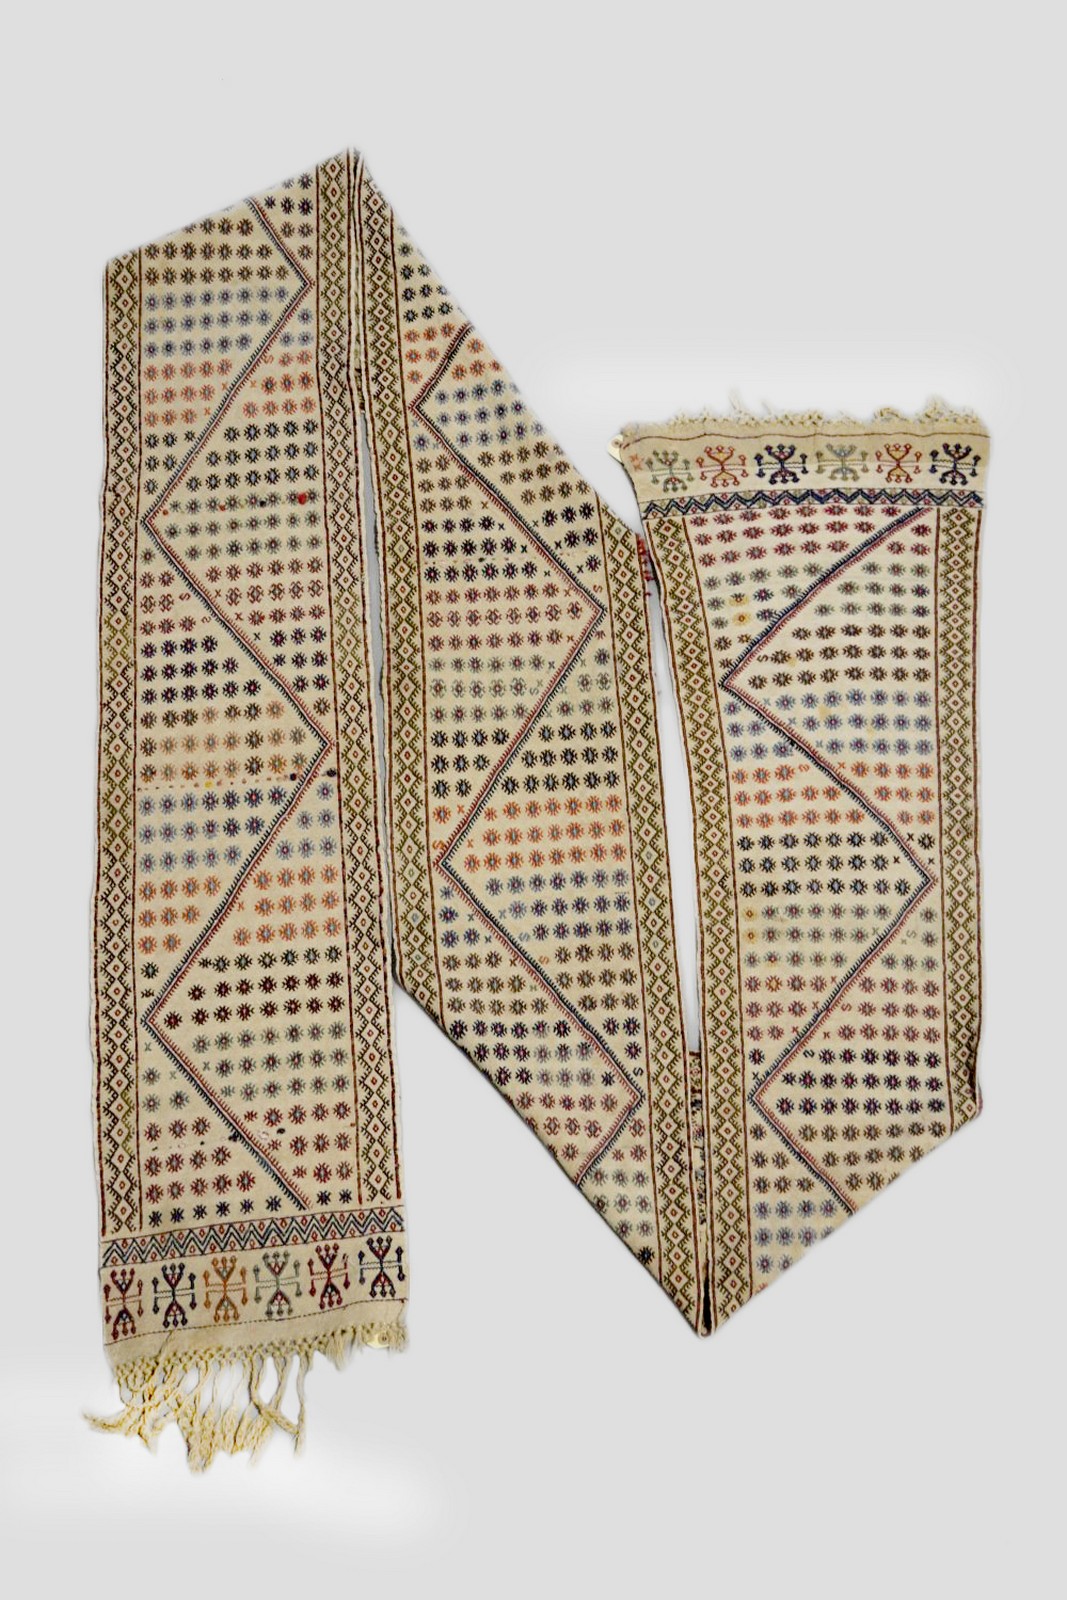 Attractive Kurdish embroidered flatweave panel, north west Persian, late 19th century, 13ft. 10in. x